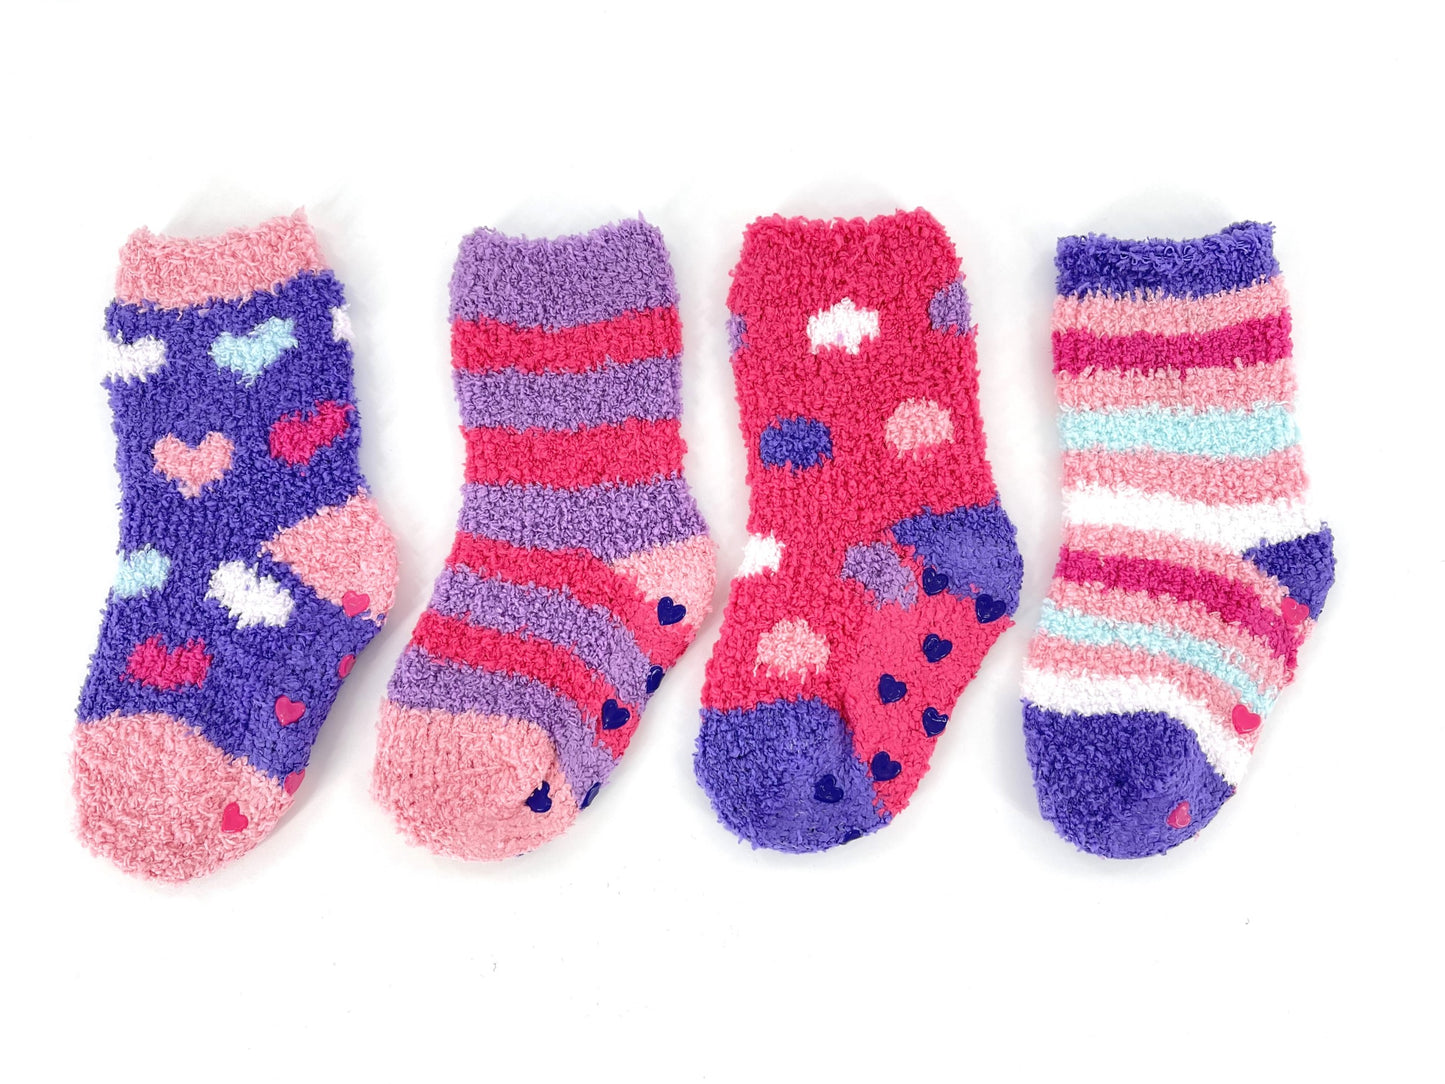 4 Pairs Baby Girls' Supersoft Fluffy Patterned Socks with Grippers